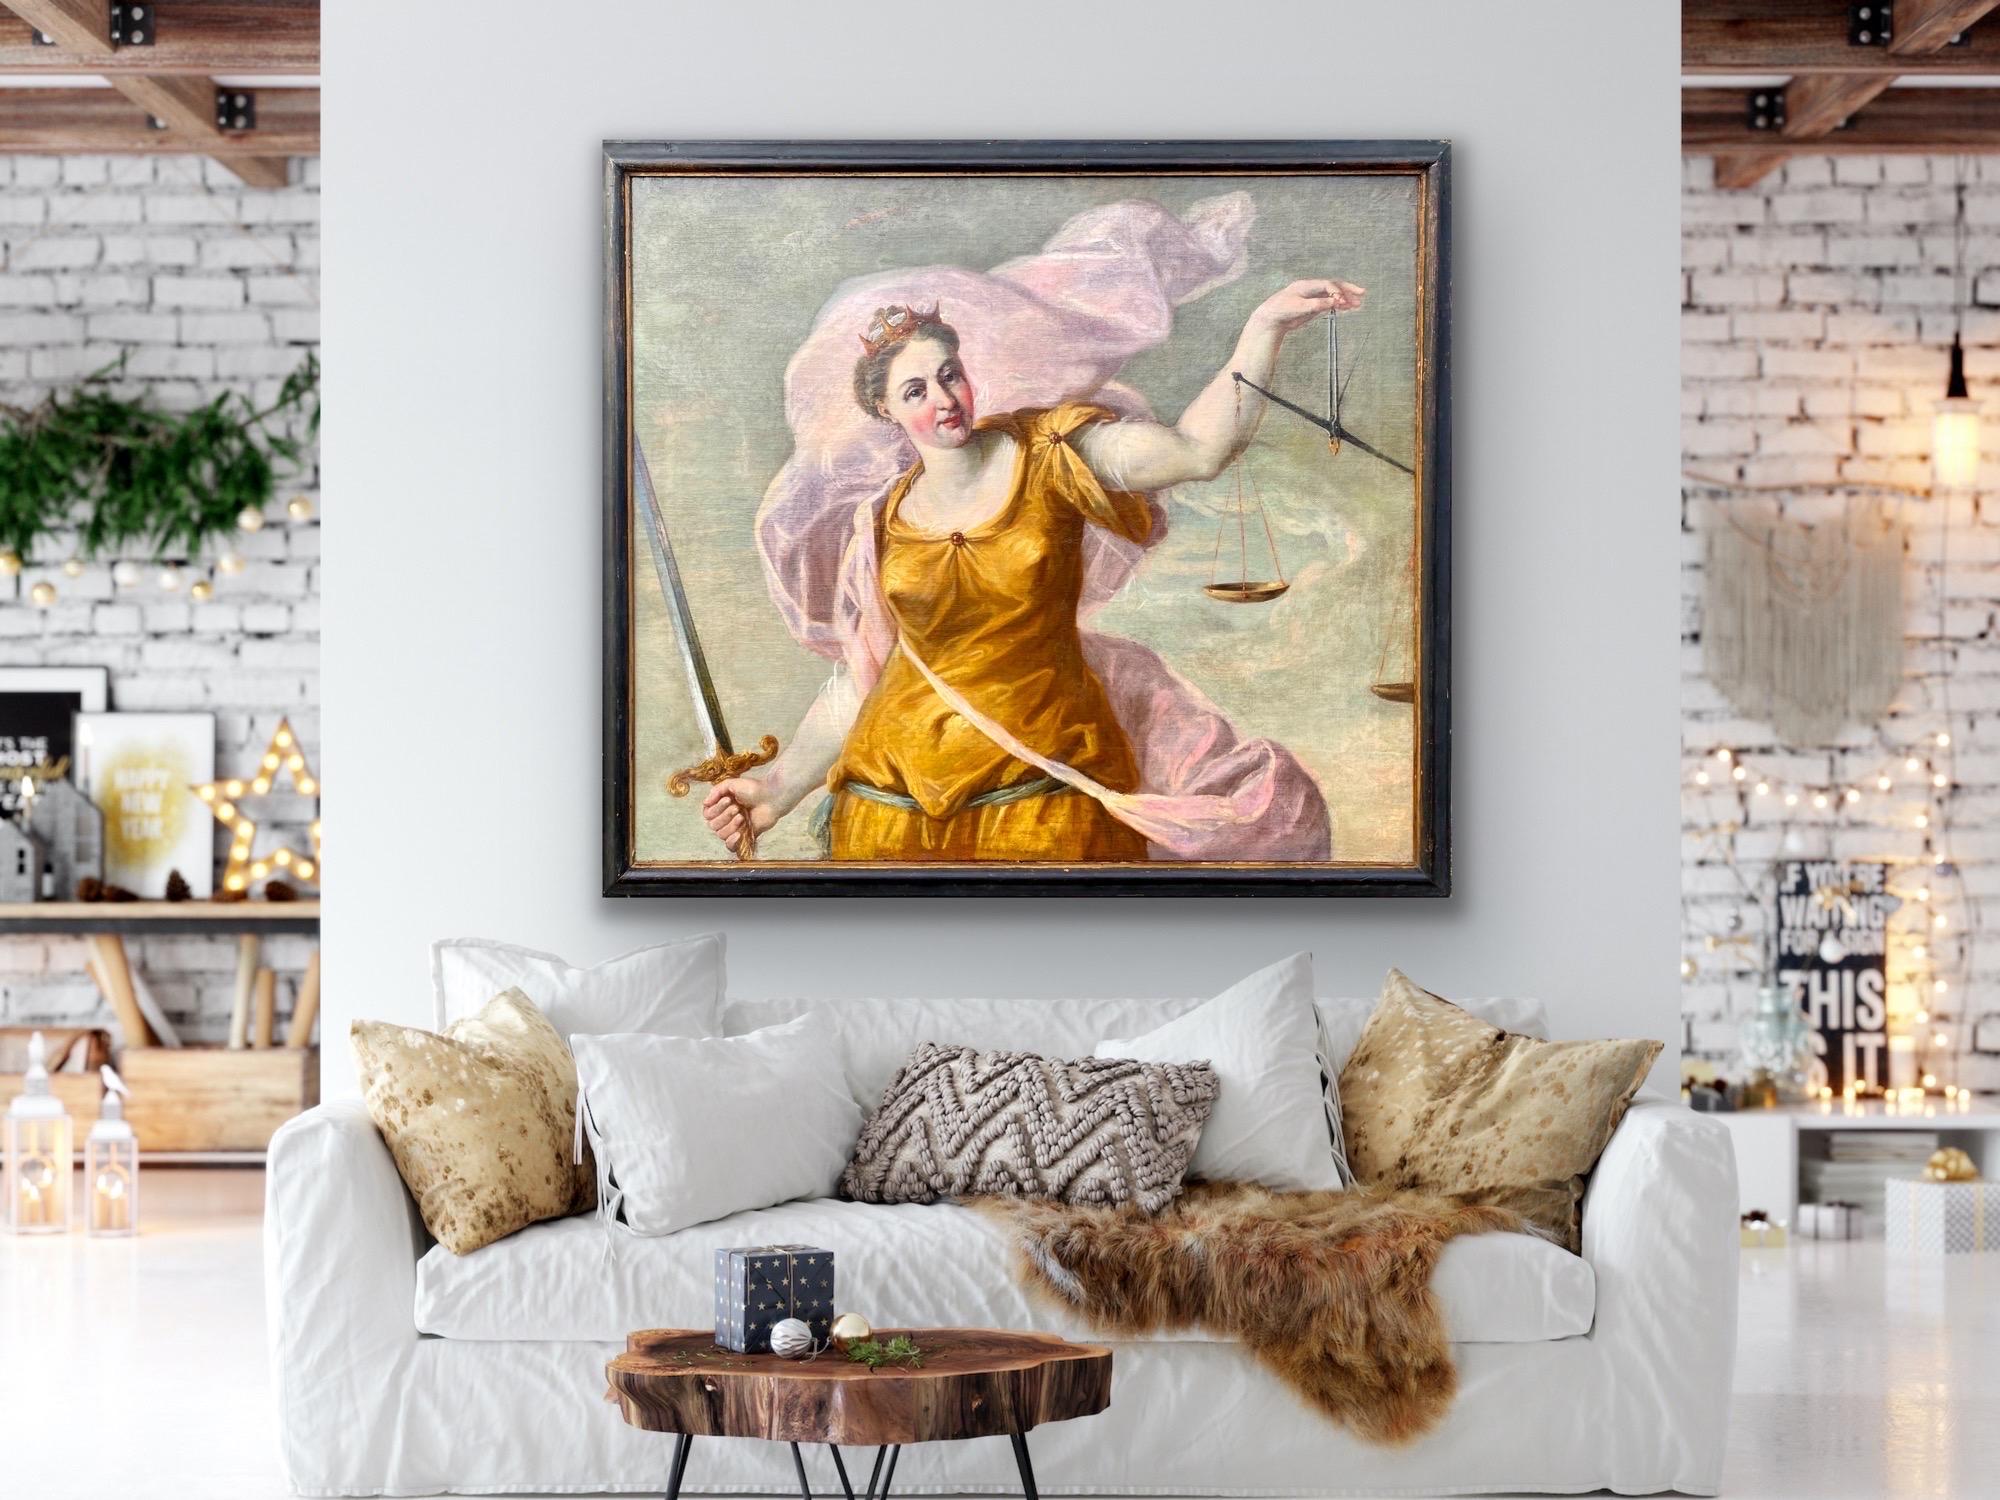 Huge 17th century Italian old master painting - Justitia - Lady Justice 5